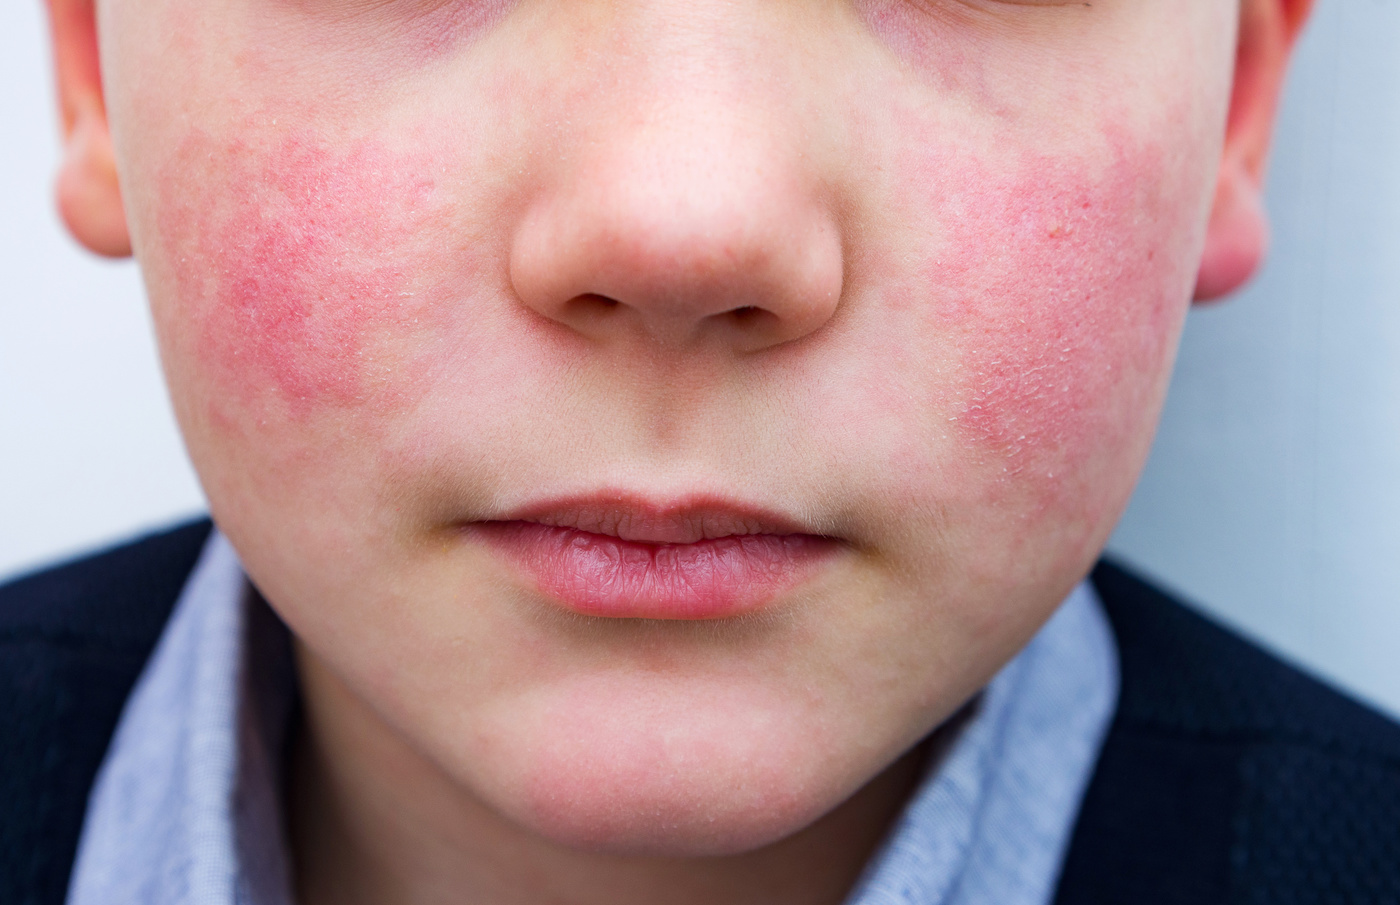 Alt text: Close-up of a child's face showing prominent red cheeks indicative of a skin condition, potentially requiring careful evaluation and management strategies as part of a comprehensive approach to treating skin redness in children.